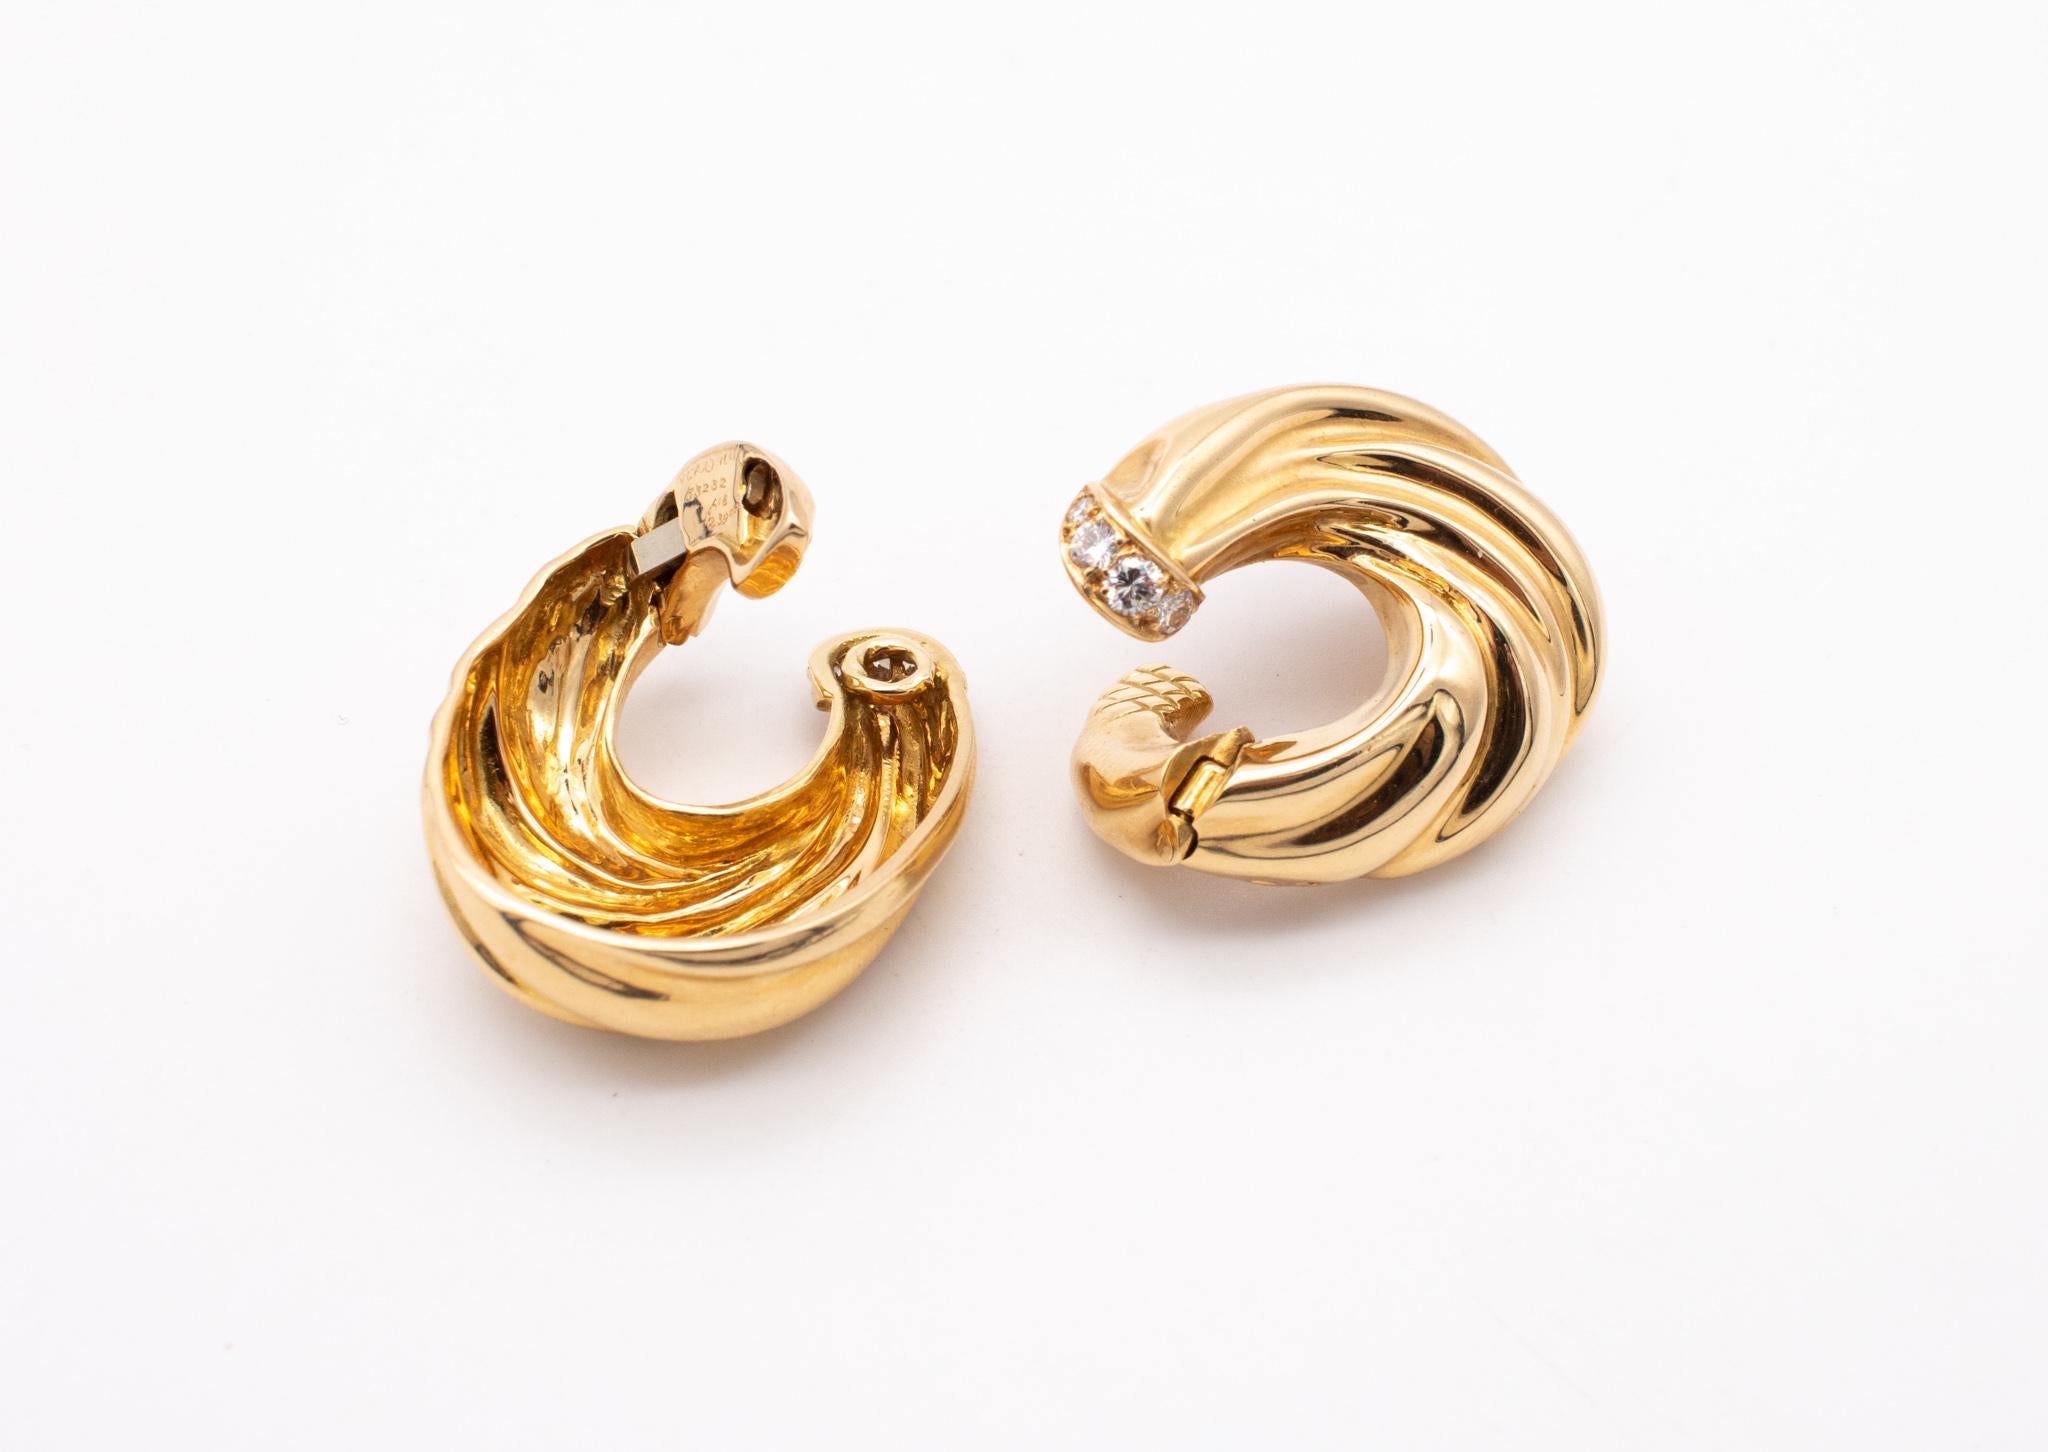 Modernist Van Cleef And Arpels 1970 Paris 18Kt Gold Clips Earrings With VVS Diamonds For Sale